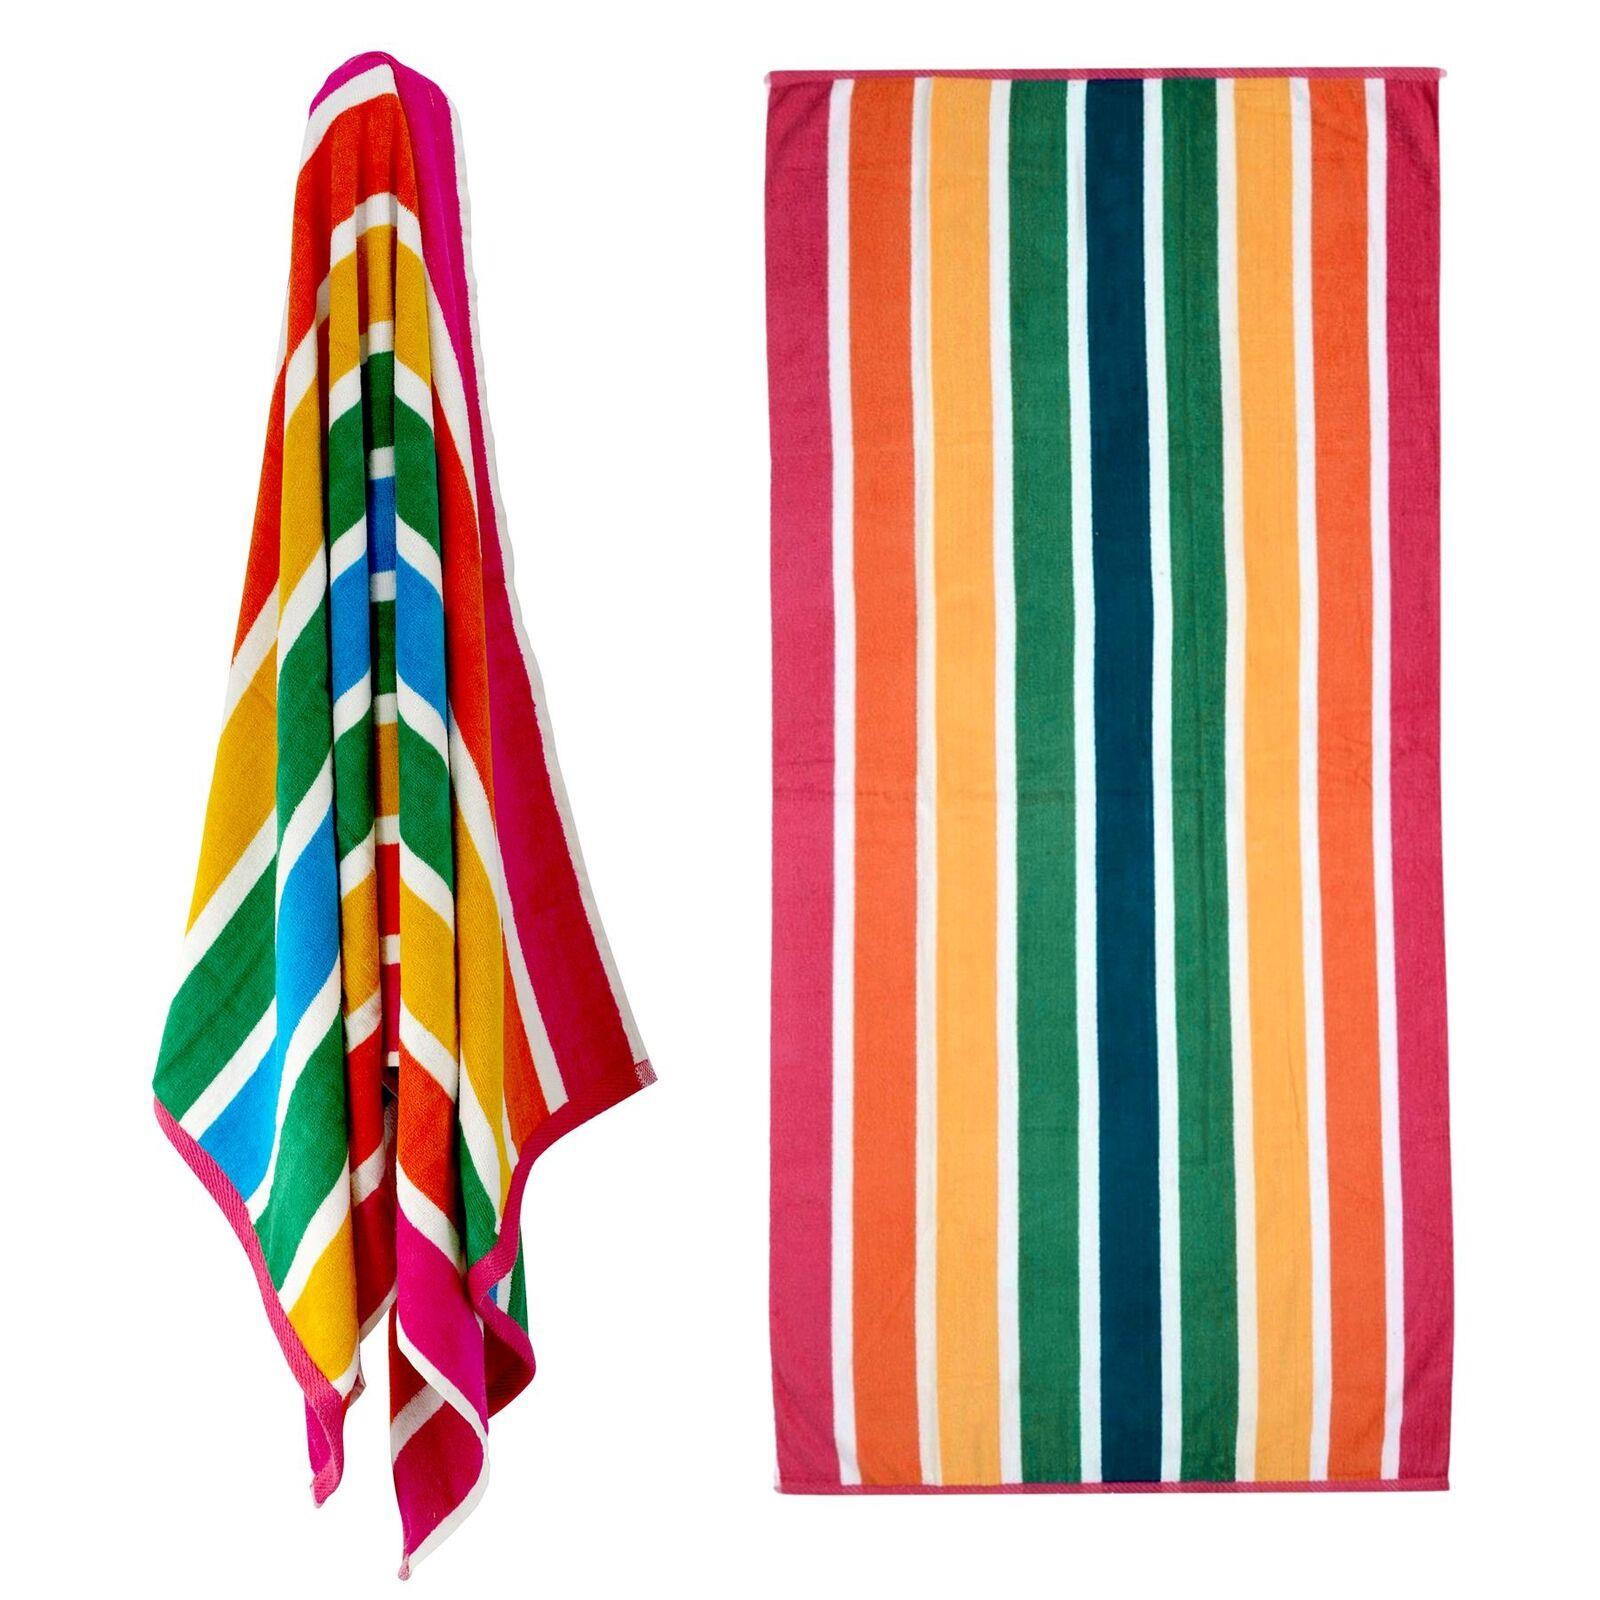 Large Velour Striped Beach Towel (Tropical Burst) by Geezy - The Magic Toy Shop